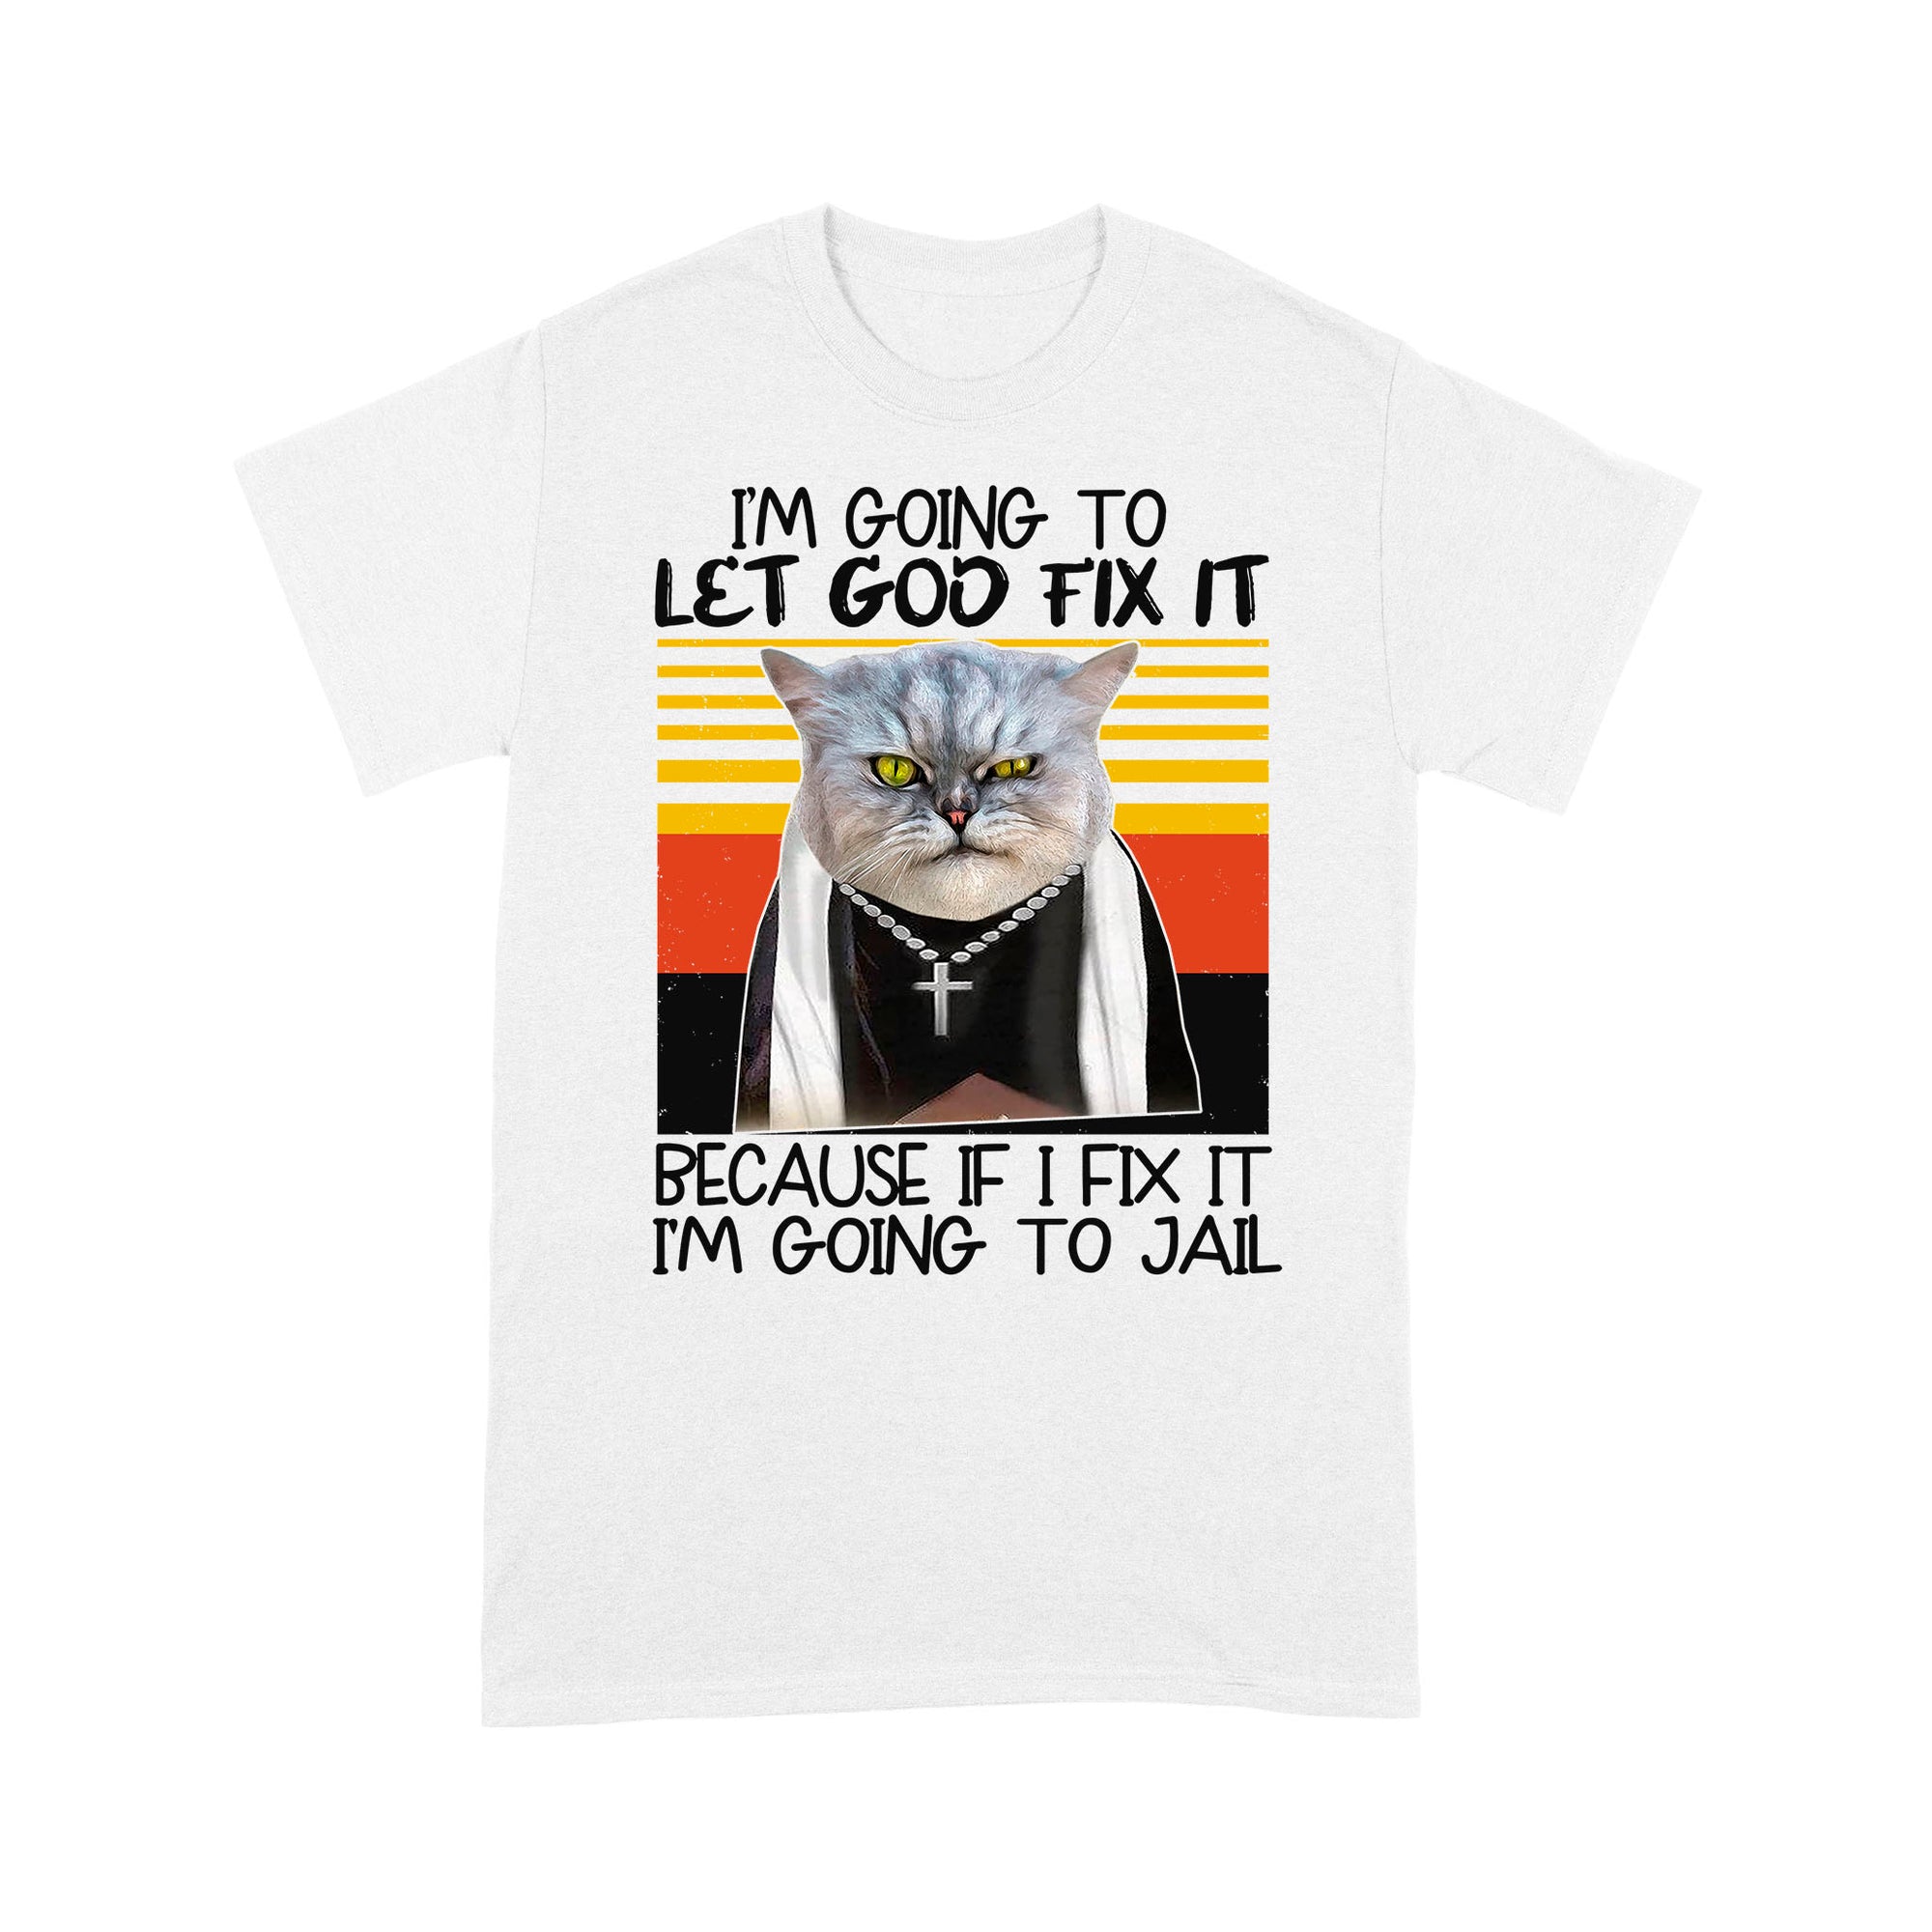 I'm Gonna Let God Fix It Because If I Fix It I'm Going To Jail Artwork of a Cat With a Cross Necklace Funny T-Shirt